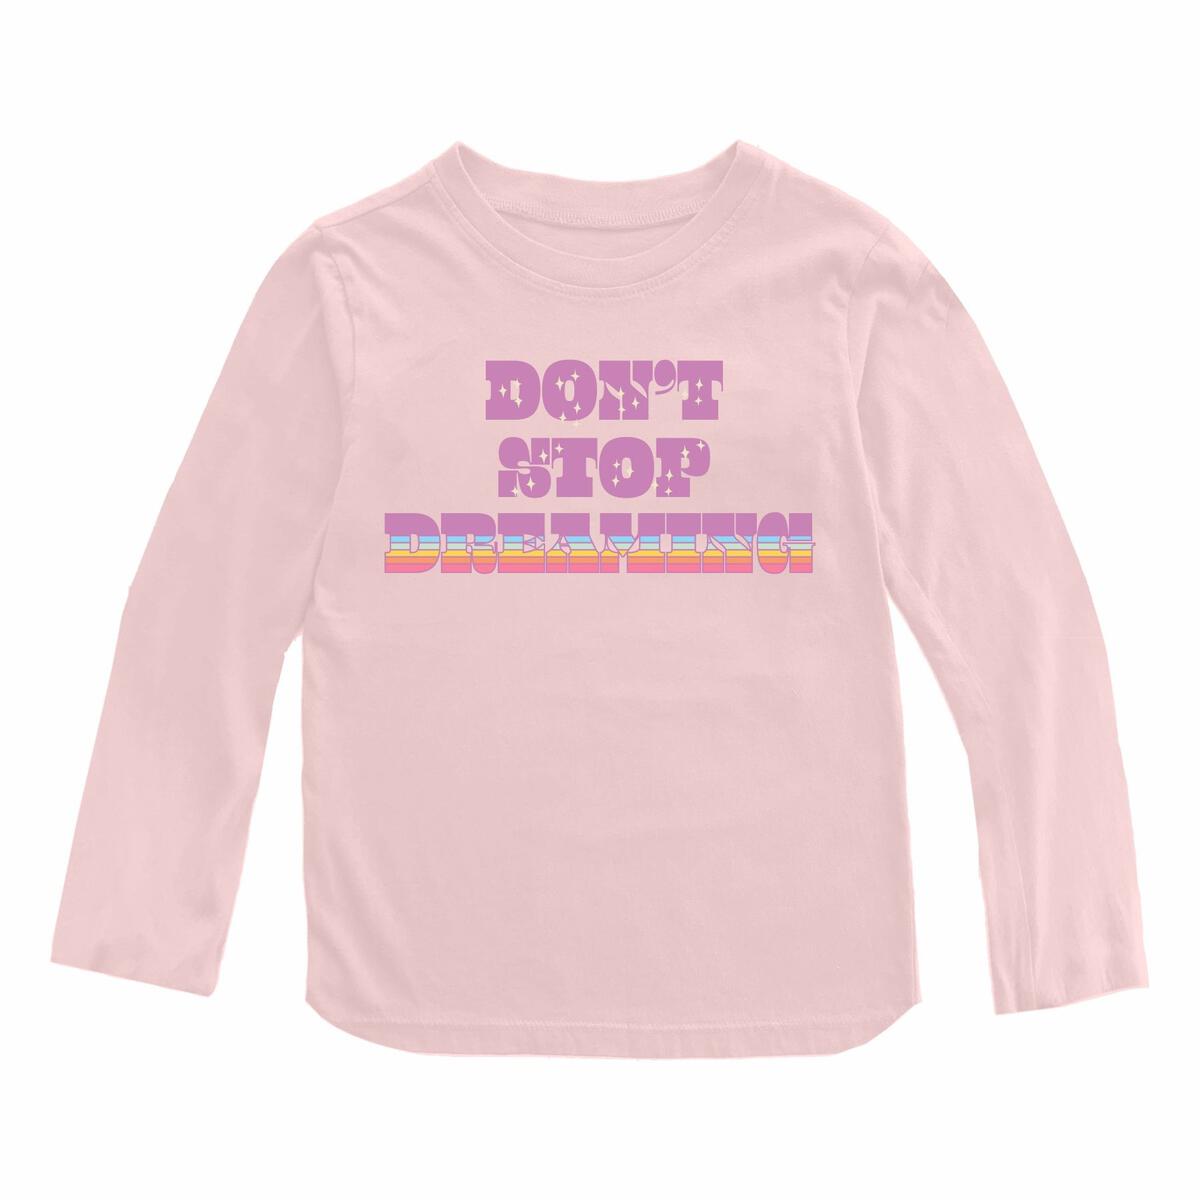 Don't Stop Dreaming Loose Fit Long Sleeve Tee